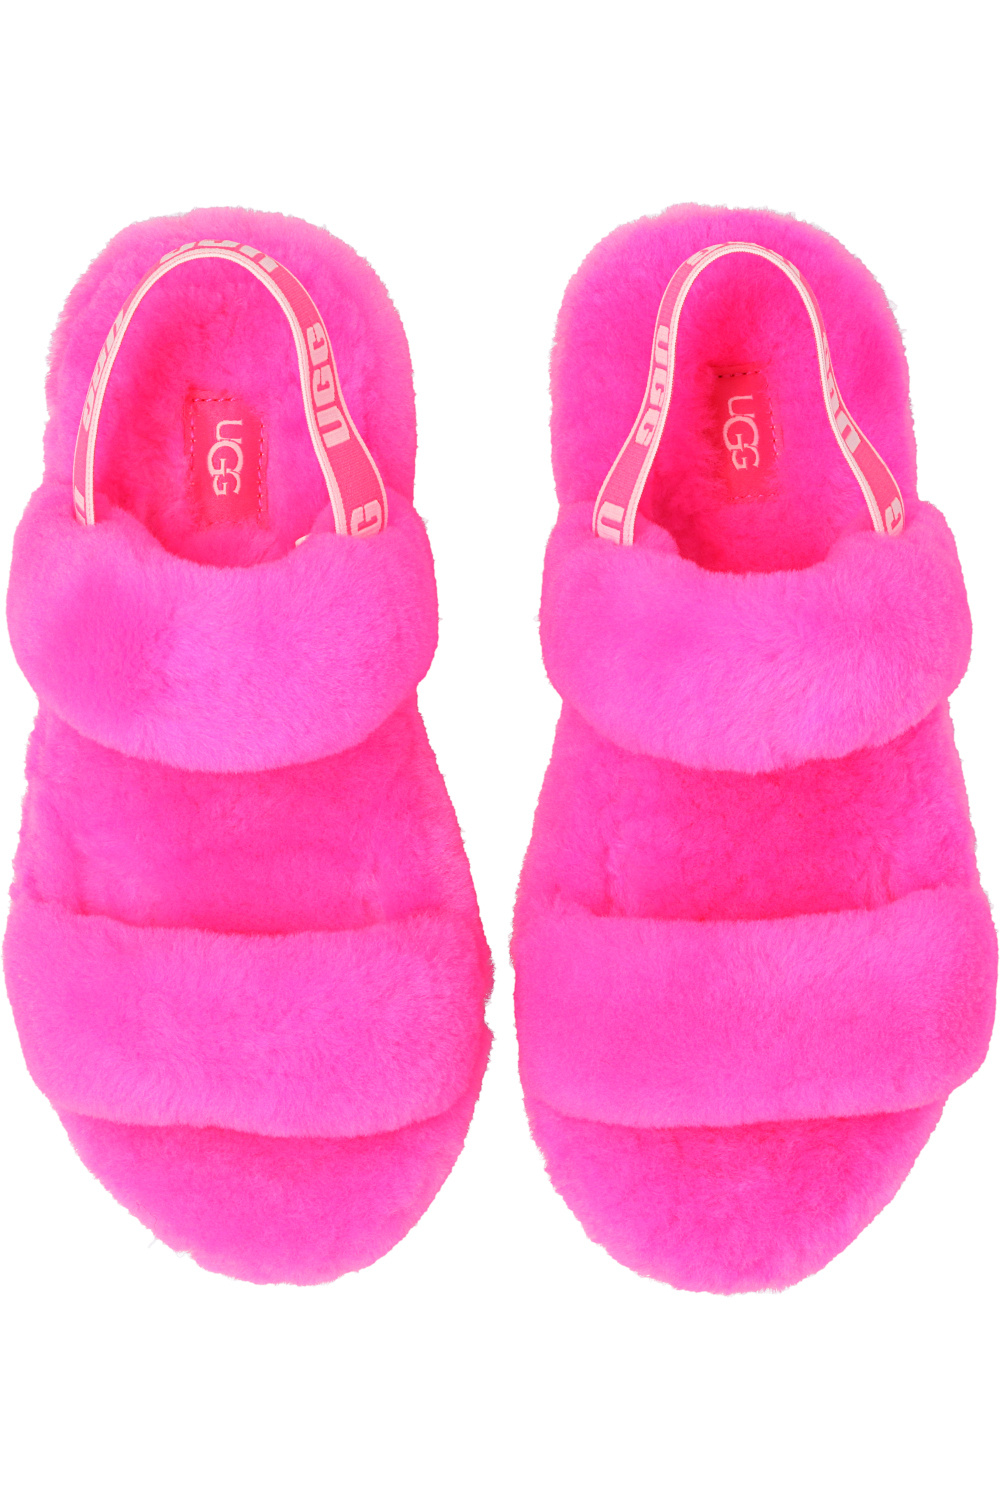 UGG Kids ‘Oh Yeah’ shearling sandals